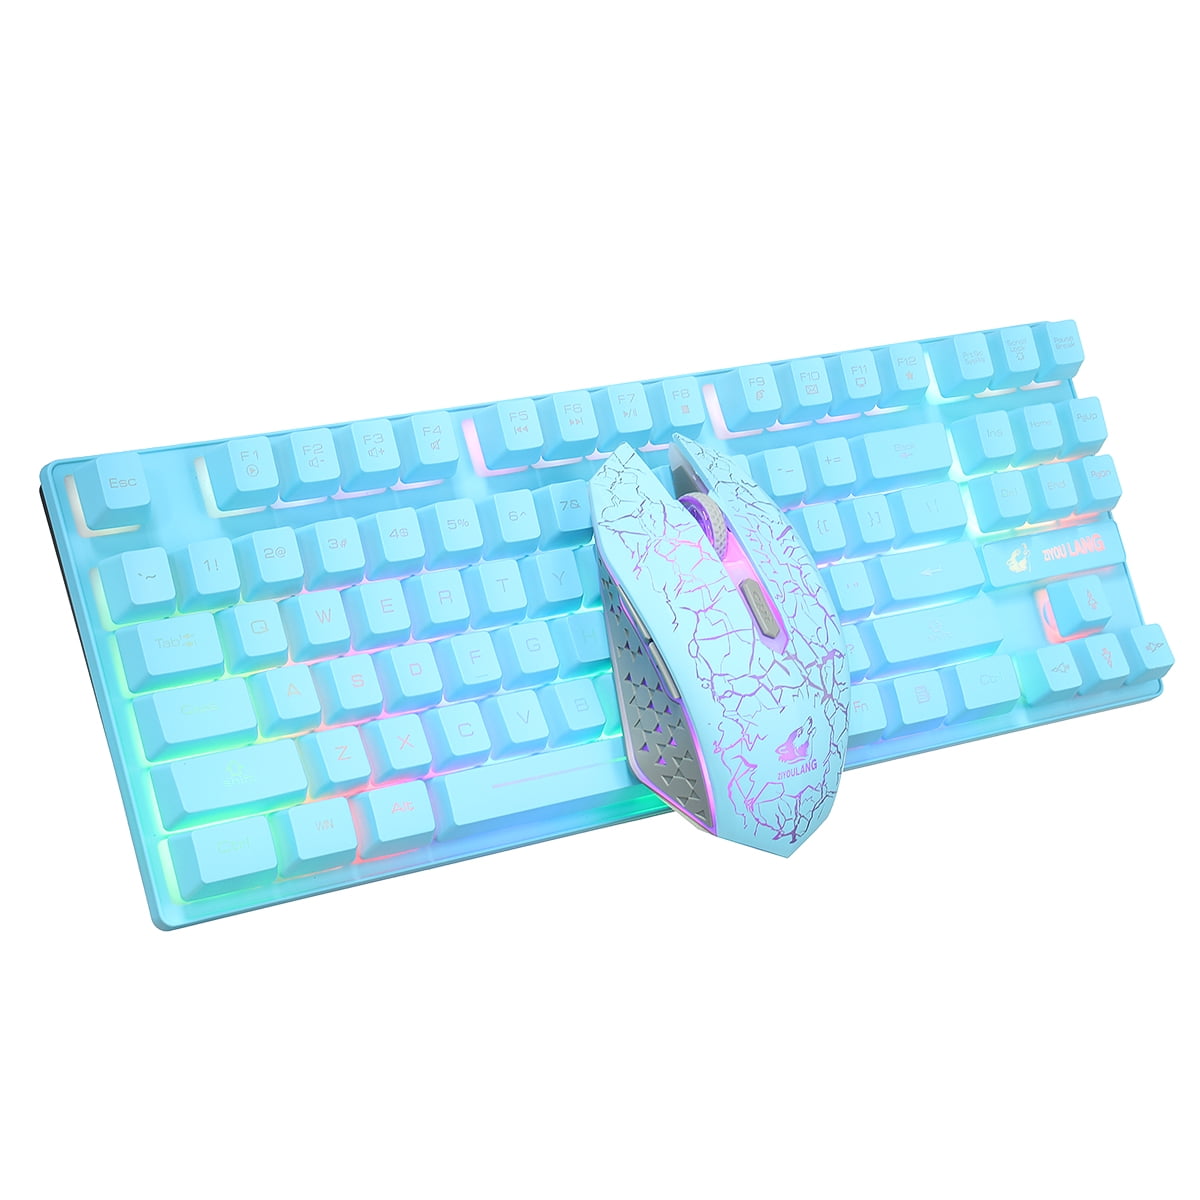 Basics Wireless Computer Keyboard and Mouse Combo Quiet and Compact US Layout Renewed QWERTY